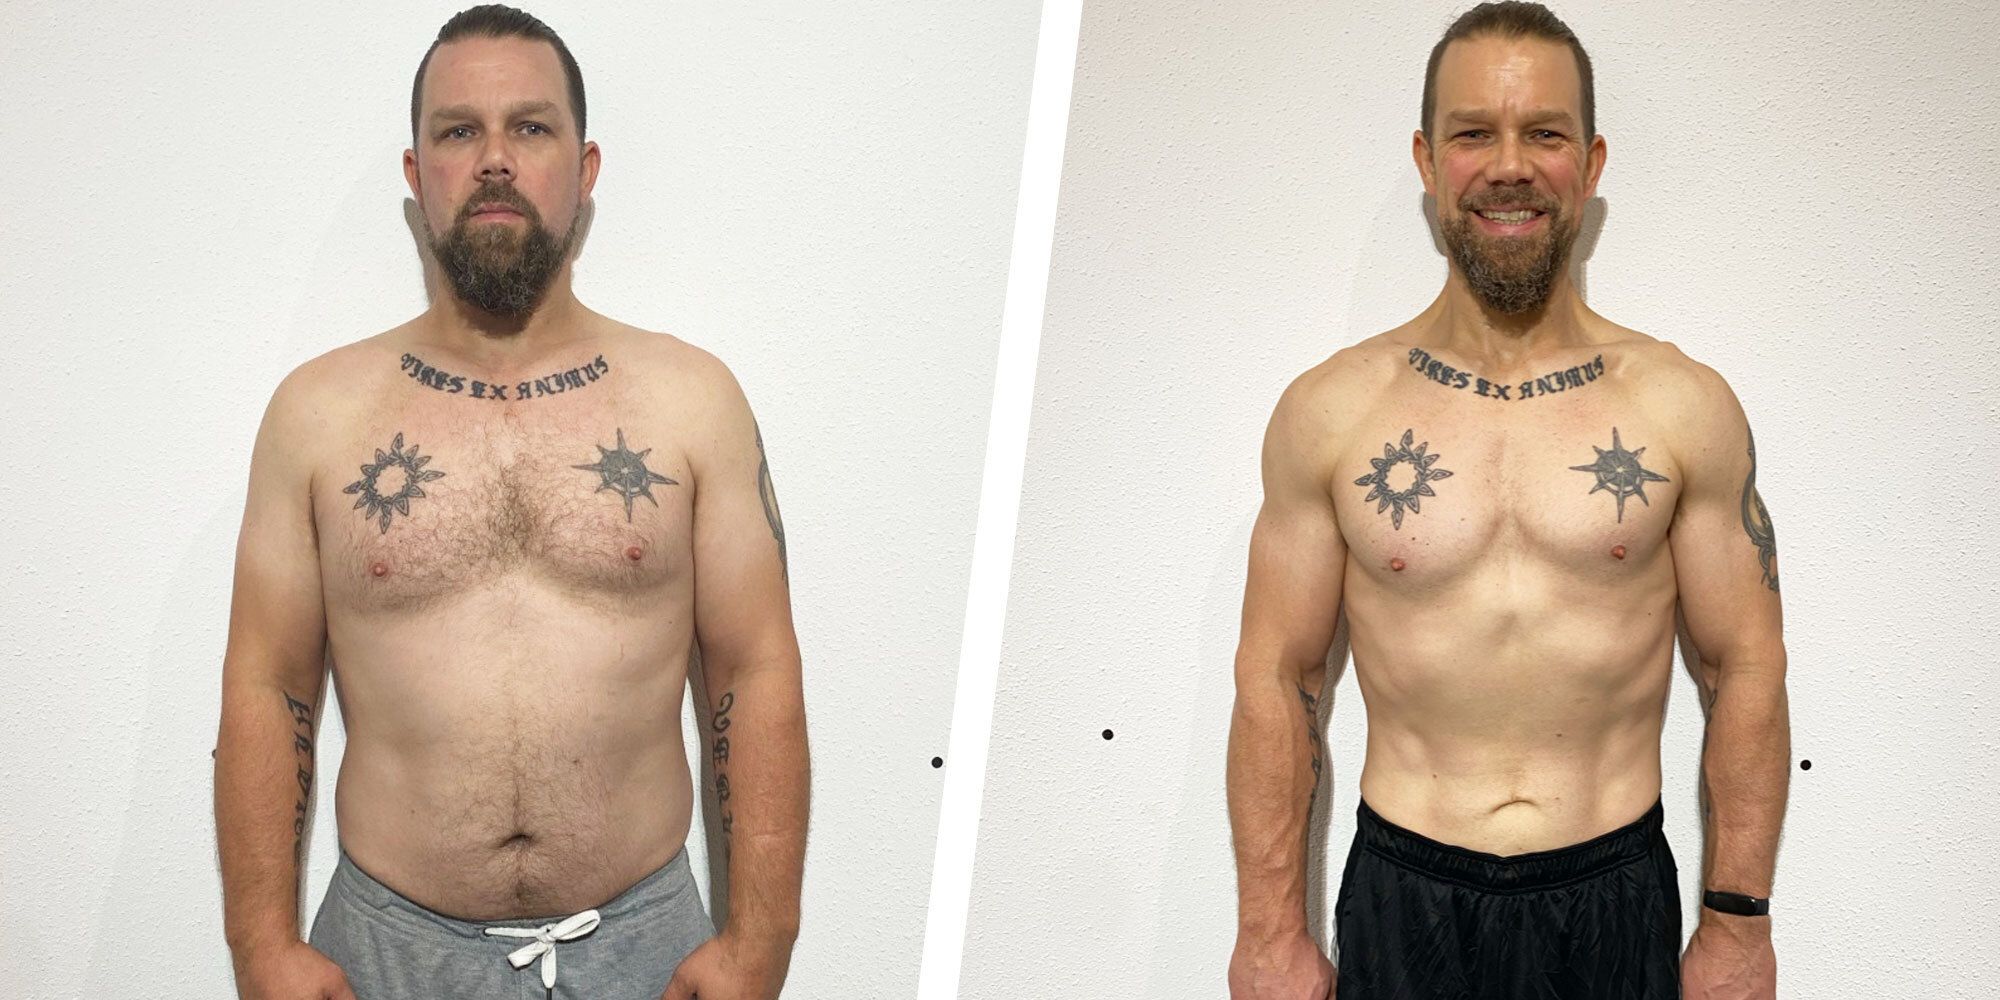 Simple Changes Helped This Man Lose 40 Pounds and Build Muscle photo image